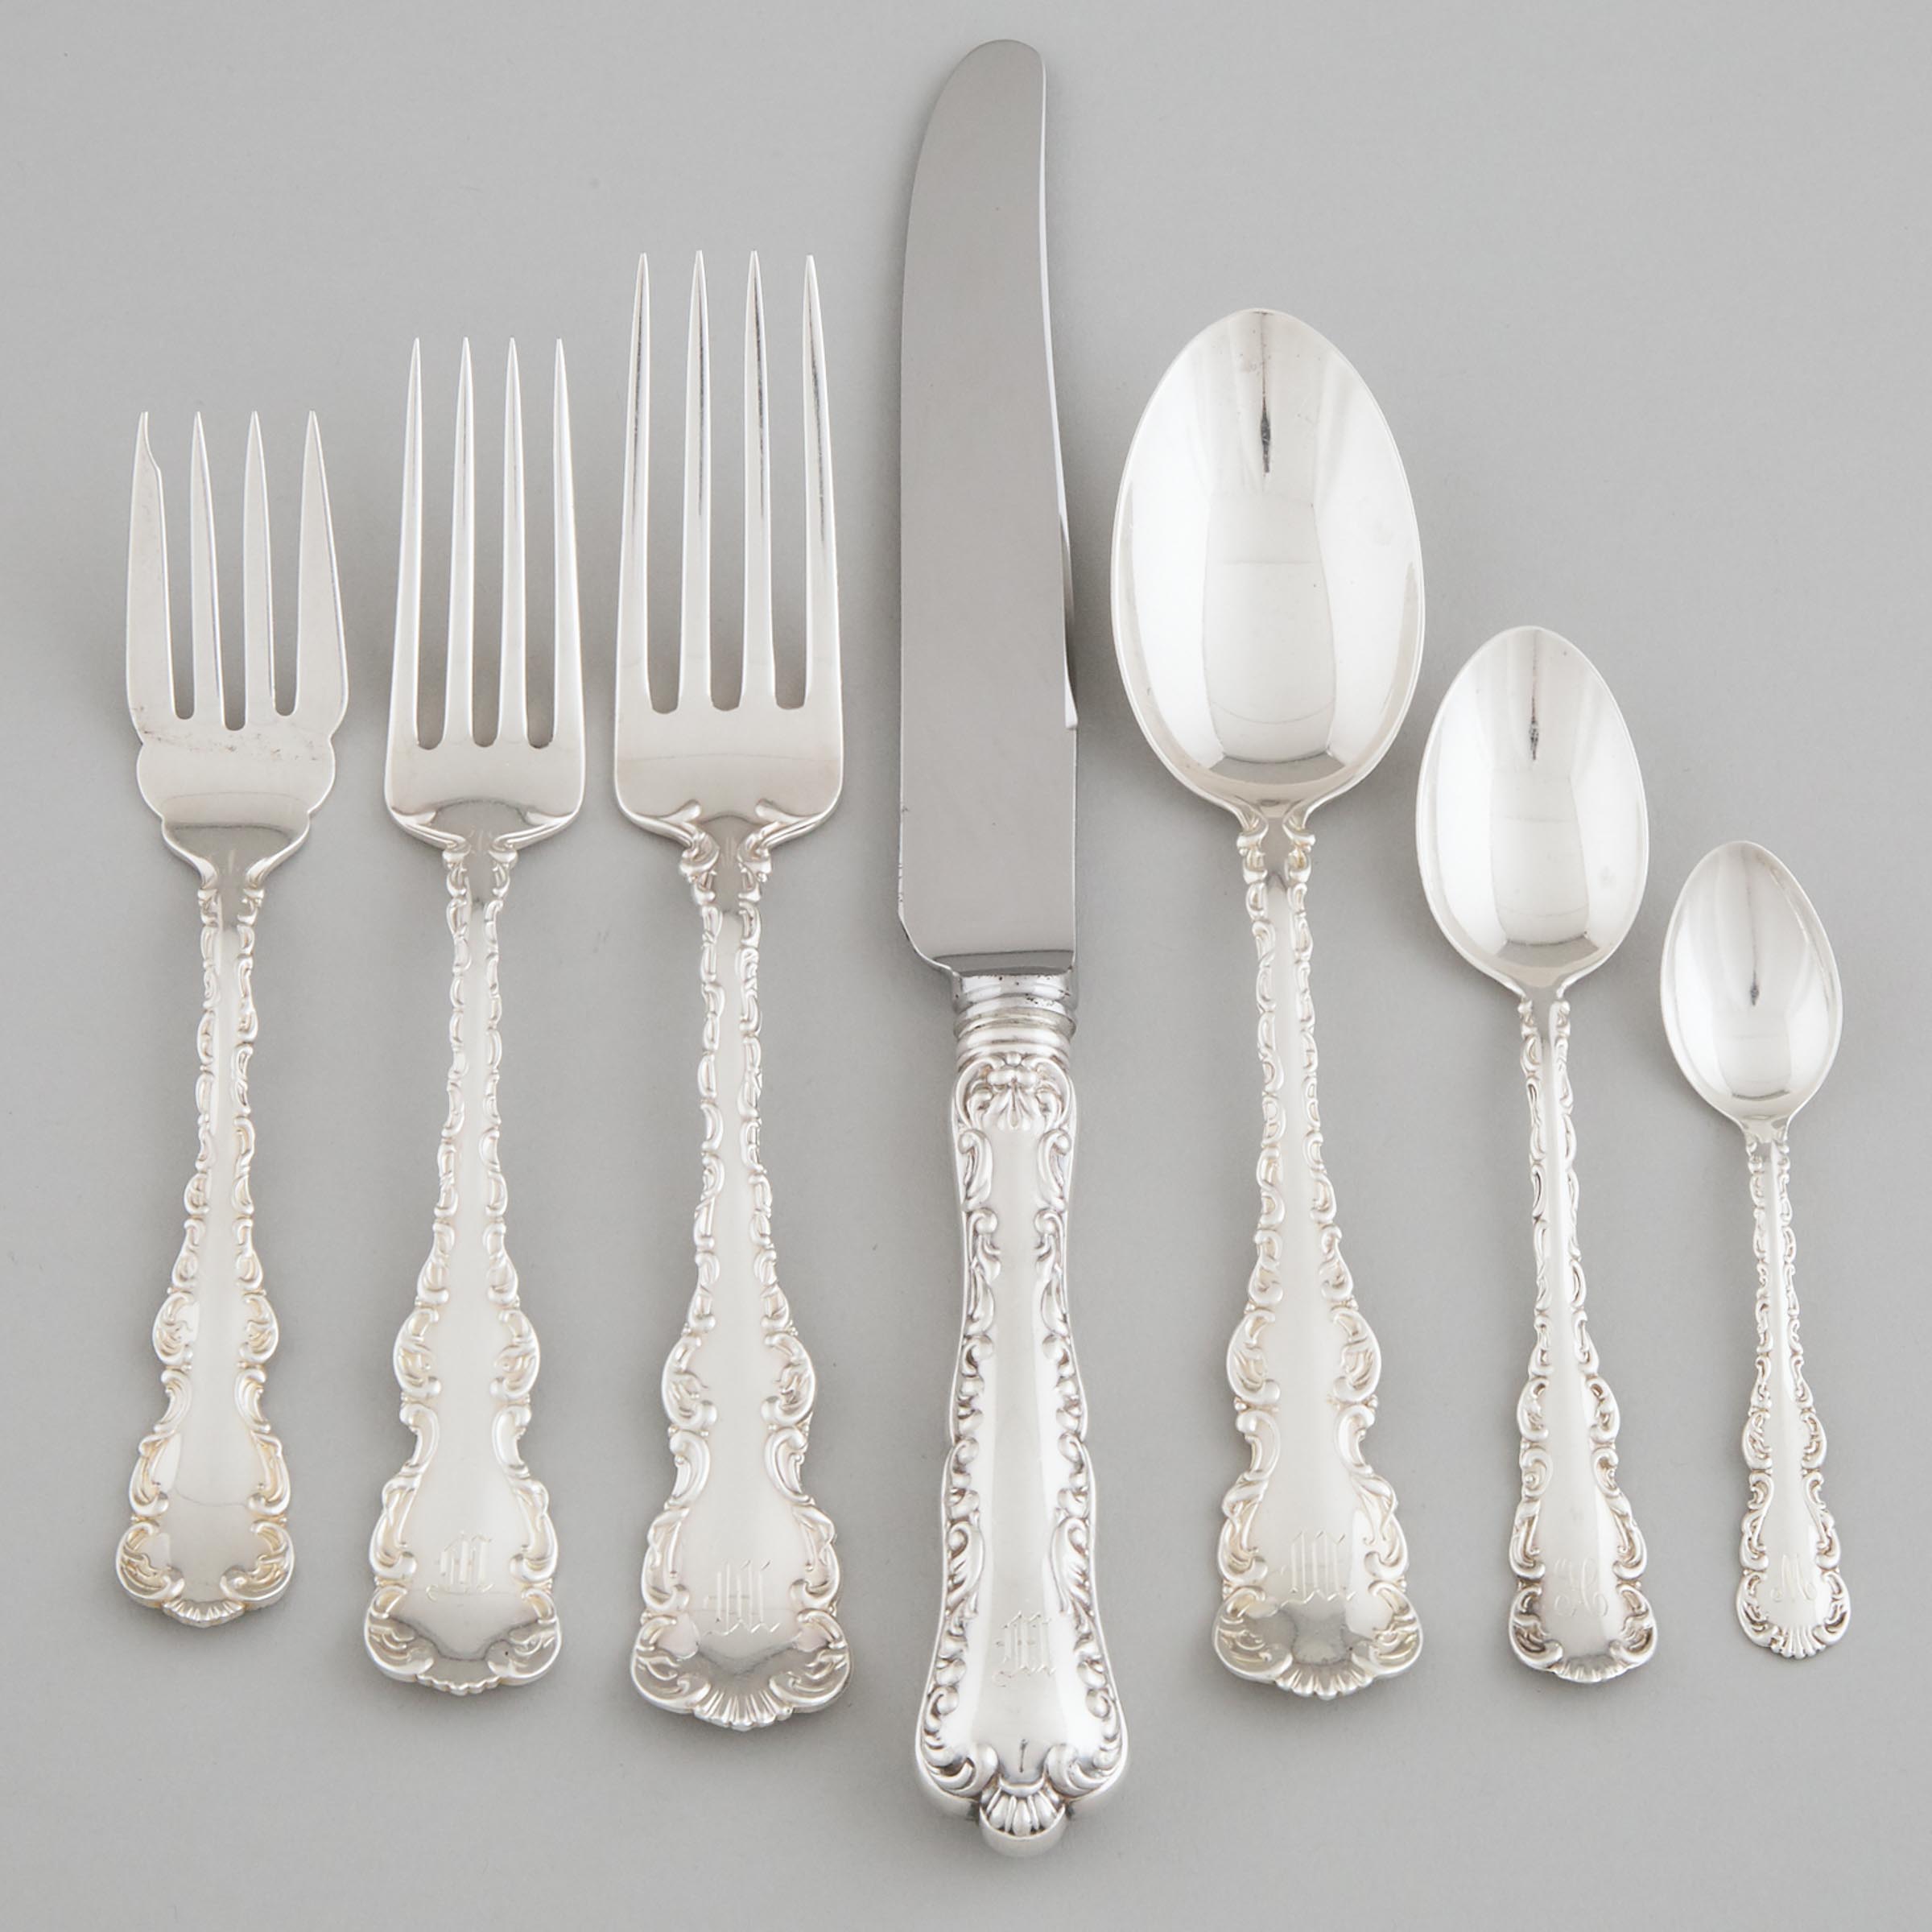 Canadian Silver ‘Louis XV’ Pattern Flatware Service, mainly Henry Birks & Sons, Montreal, Que. and Roden Bros., Toronto, Ont., 20th century